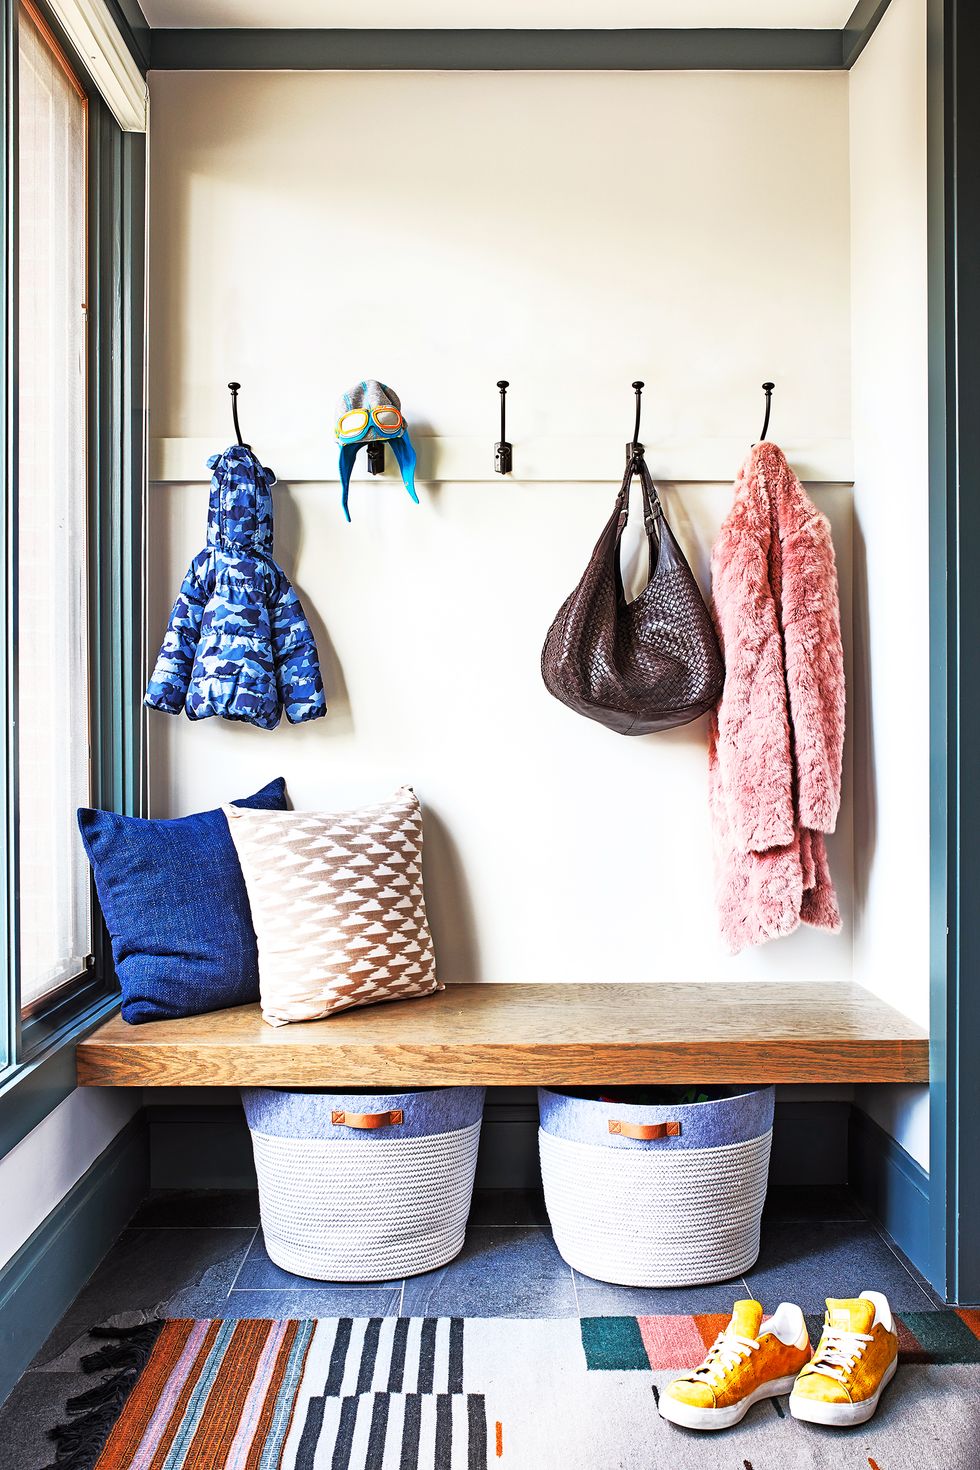 8 Steps to Building a Smart, Organized Pantry & Mudroom - Emily Henderson